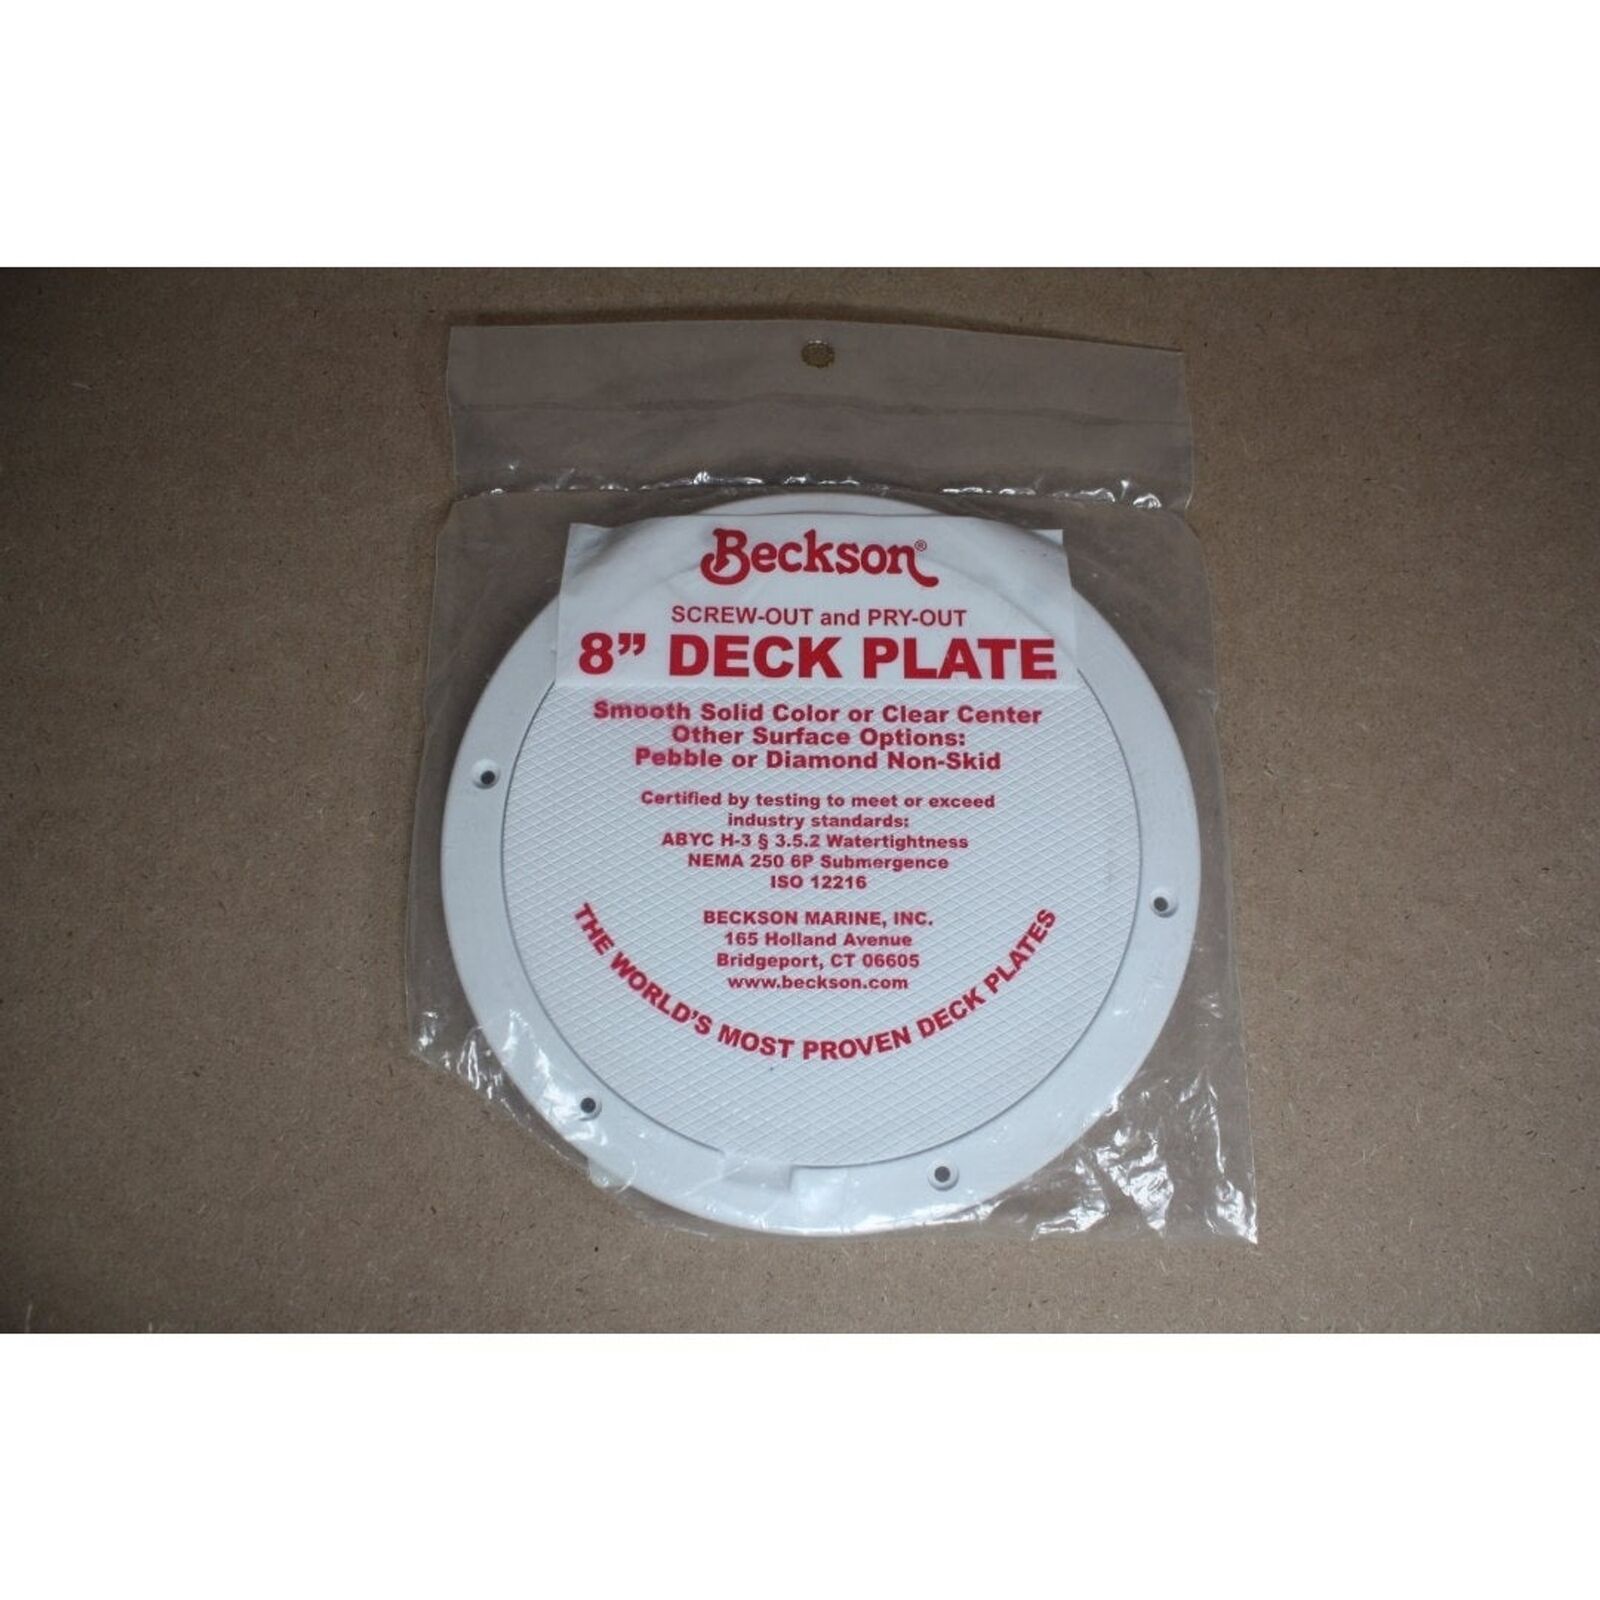 Beckson 8" Non-skid Pry-out Deck Plate White Dp83-w